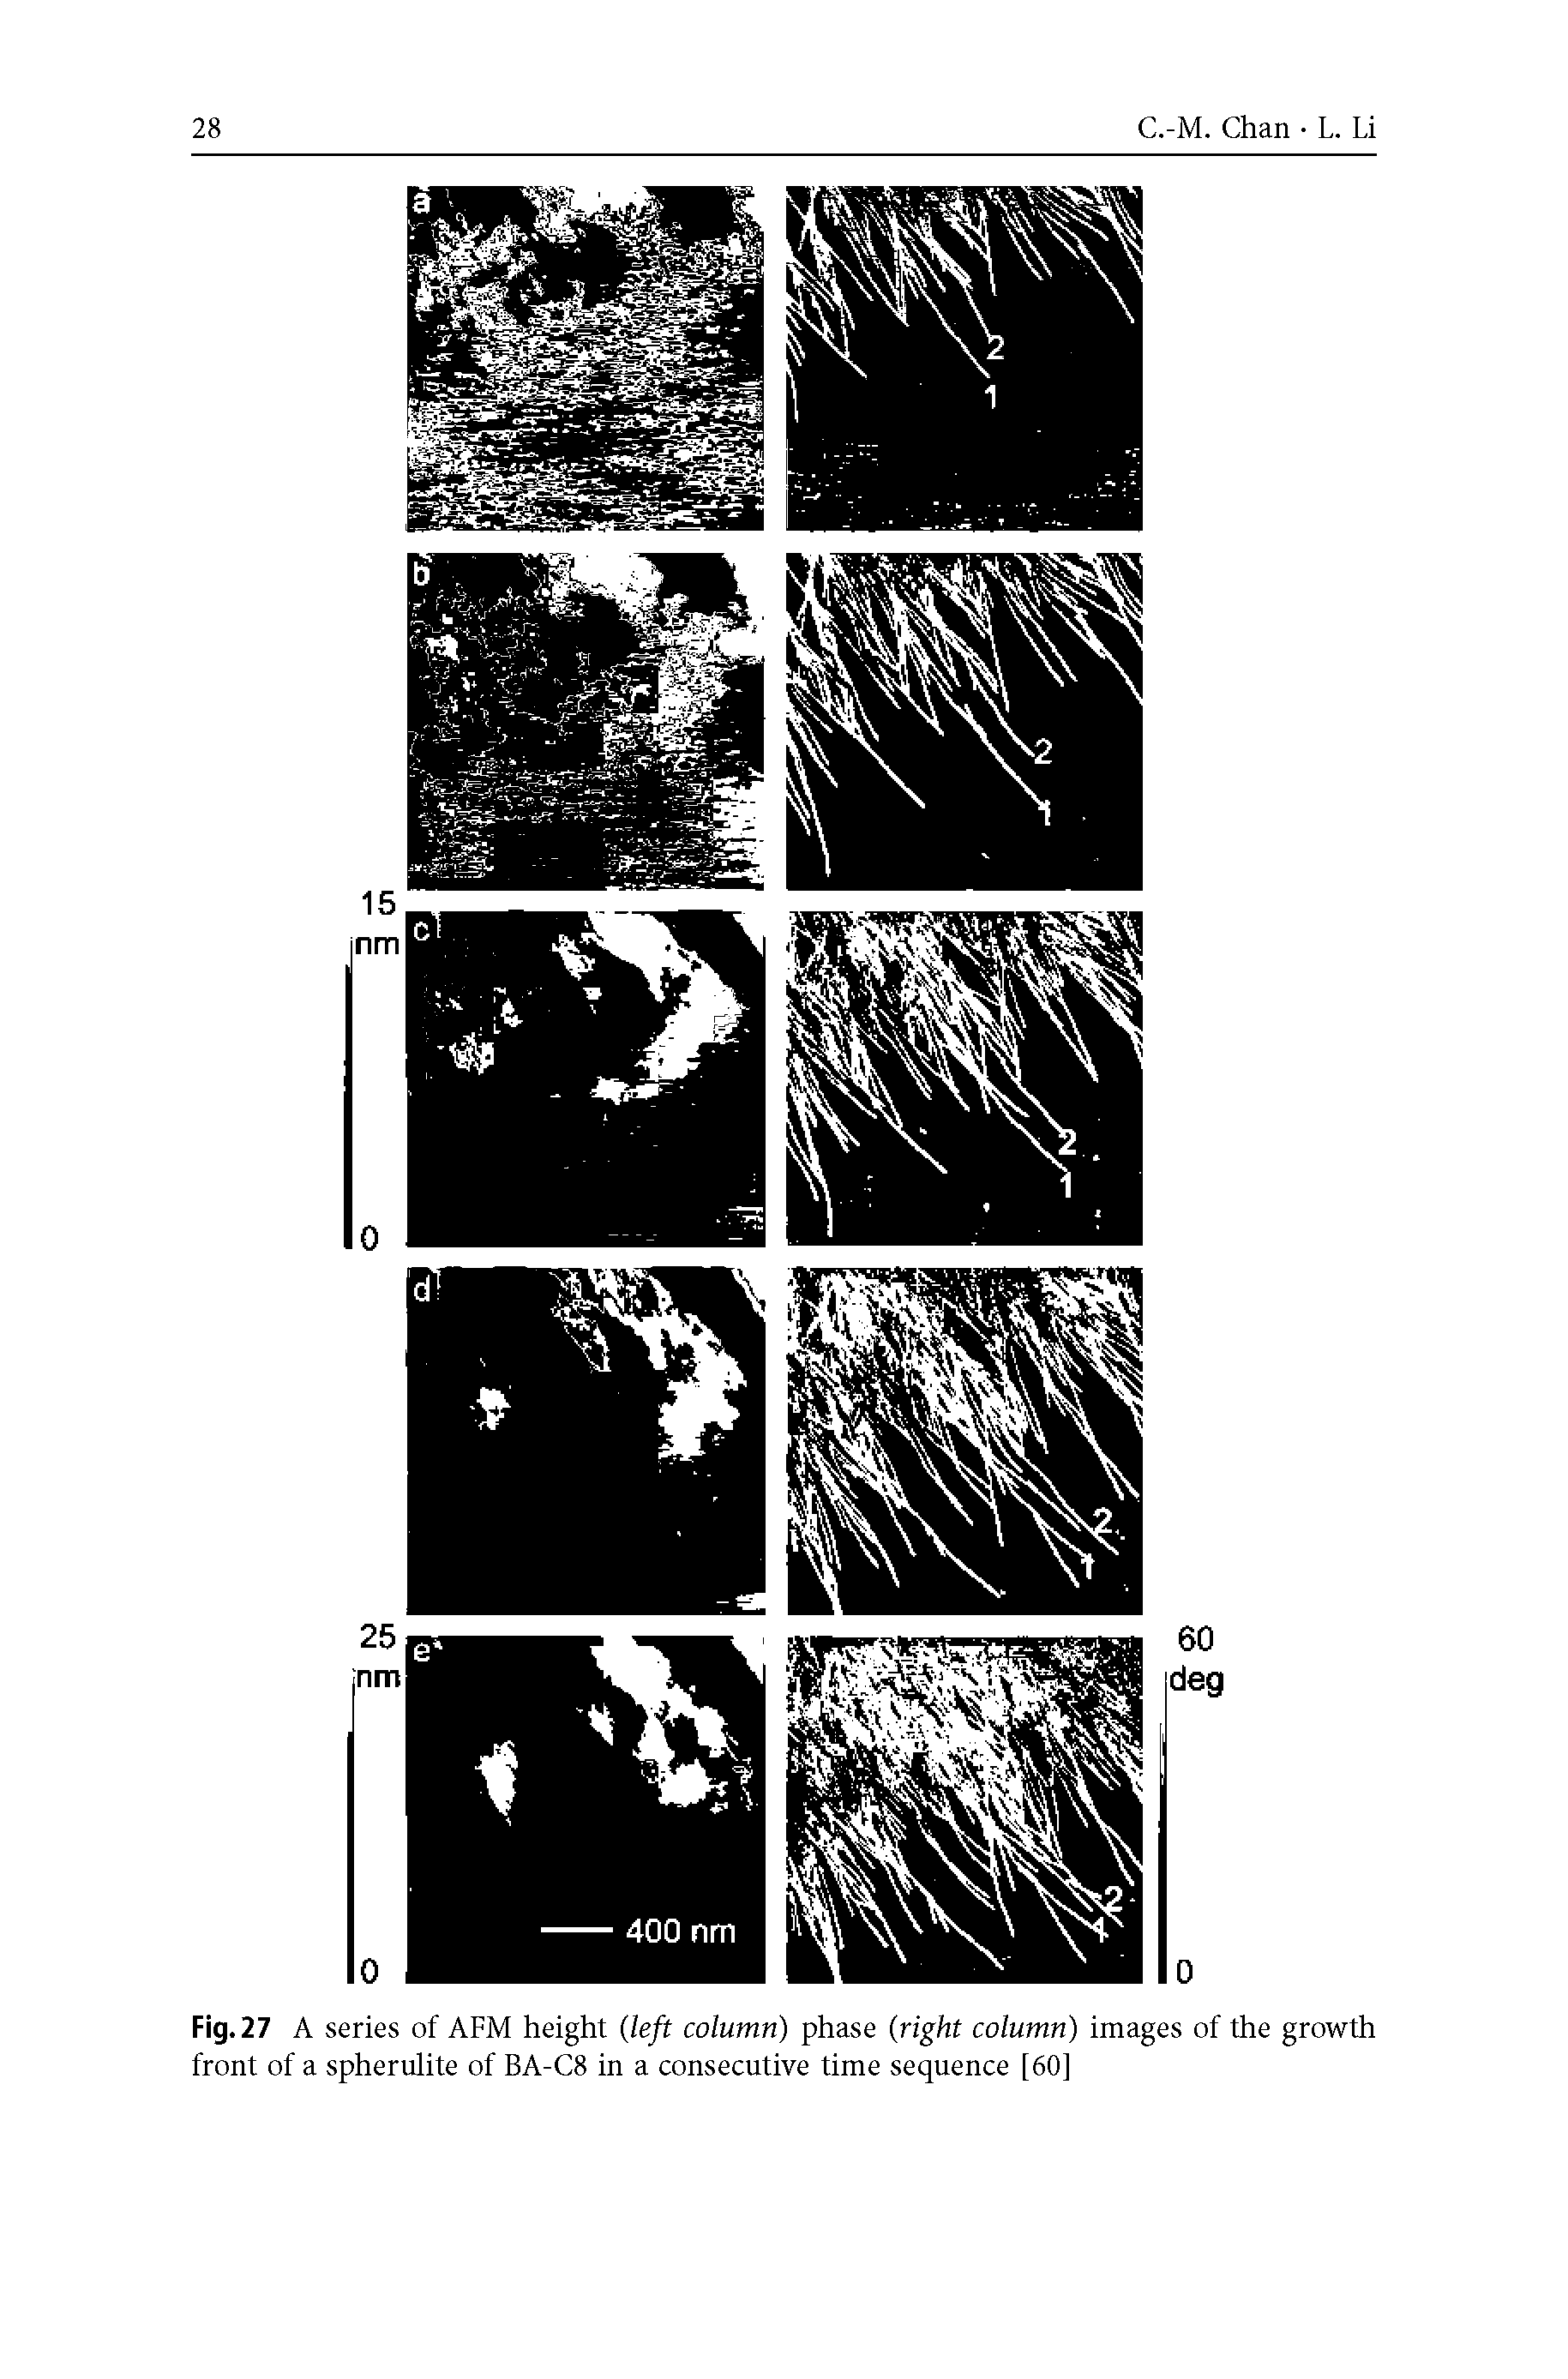 Fig. 27 A series of AFM height (left column) phase (right column) images of the growth front of a spherulite of BA-C8 in a consecutive time sequence [60]...